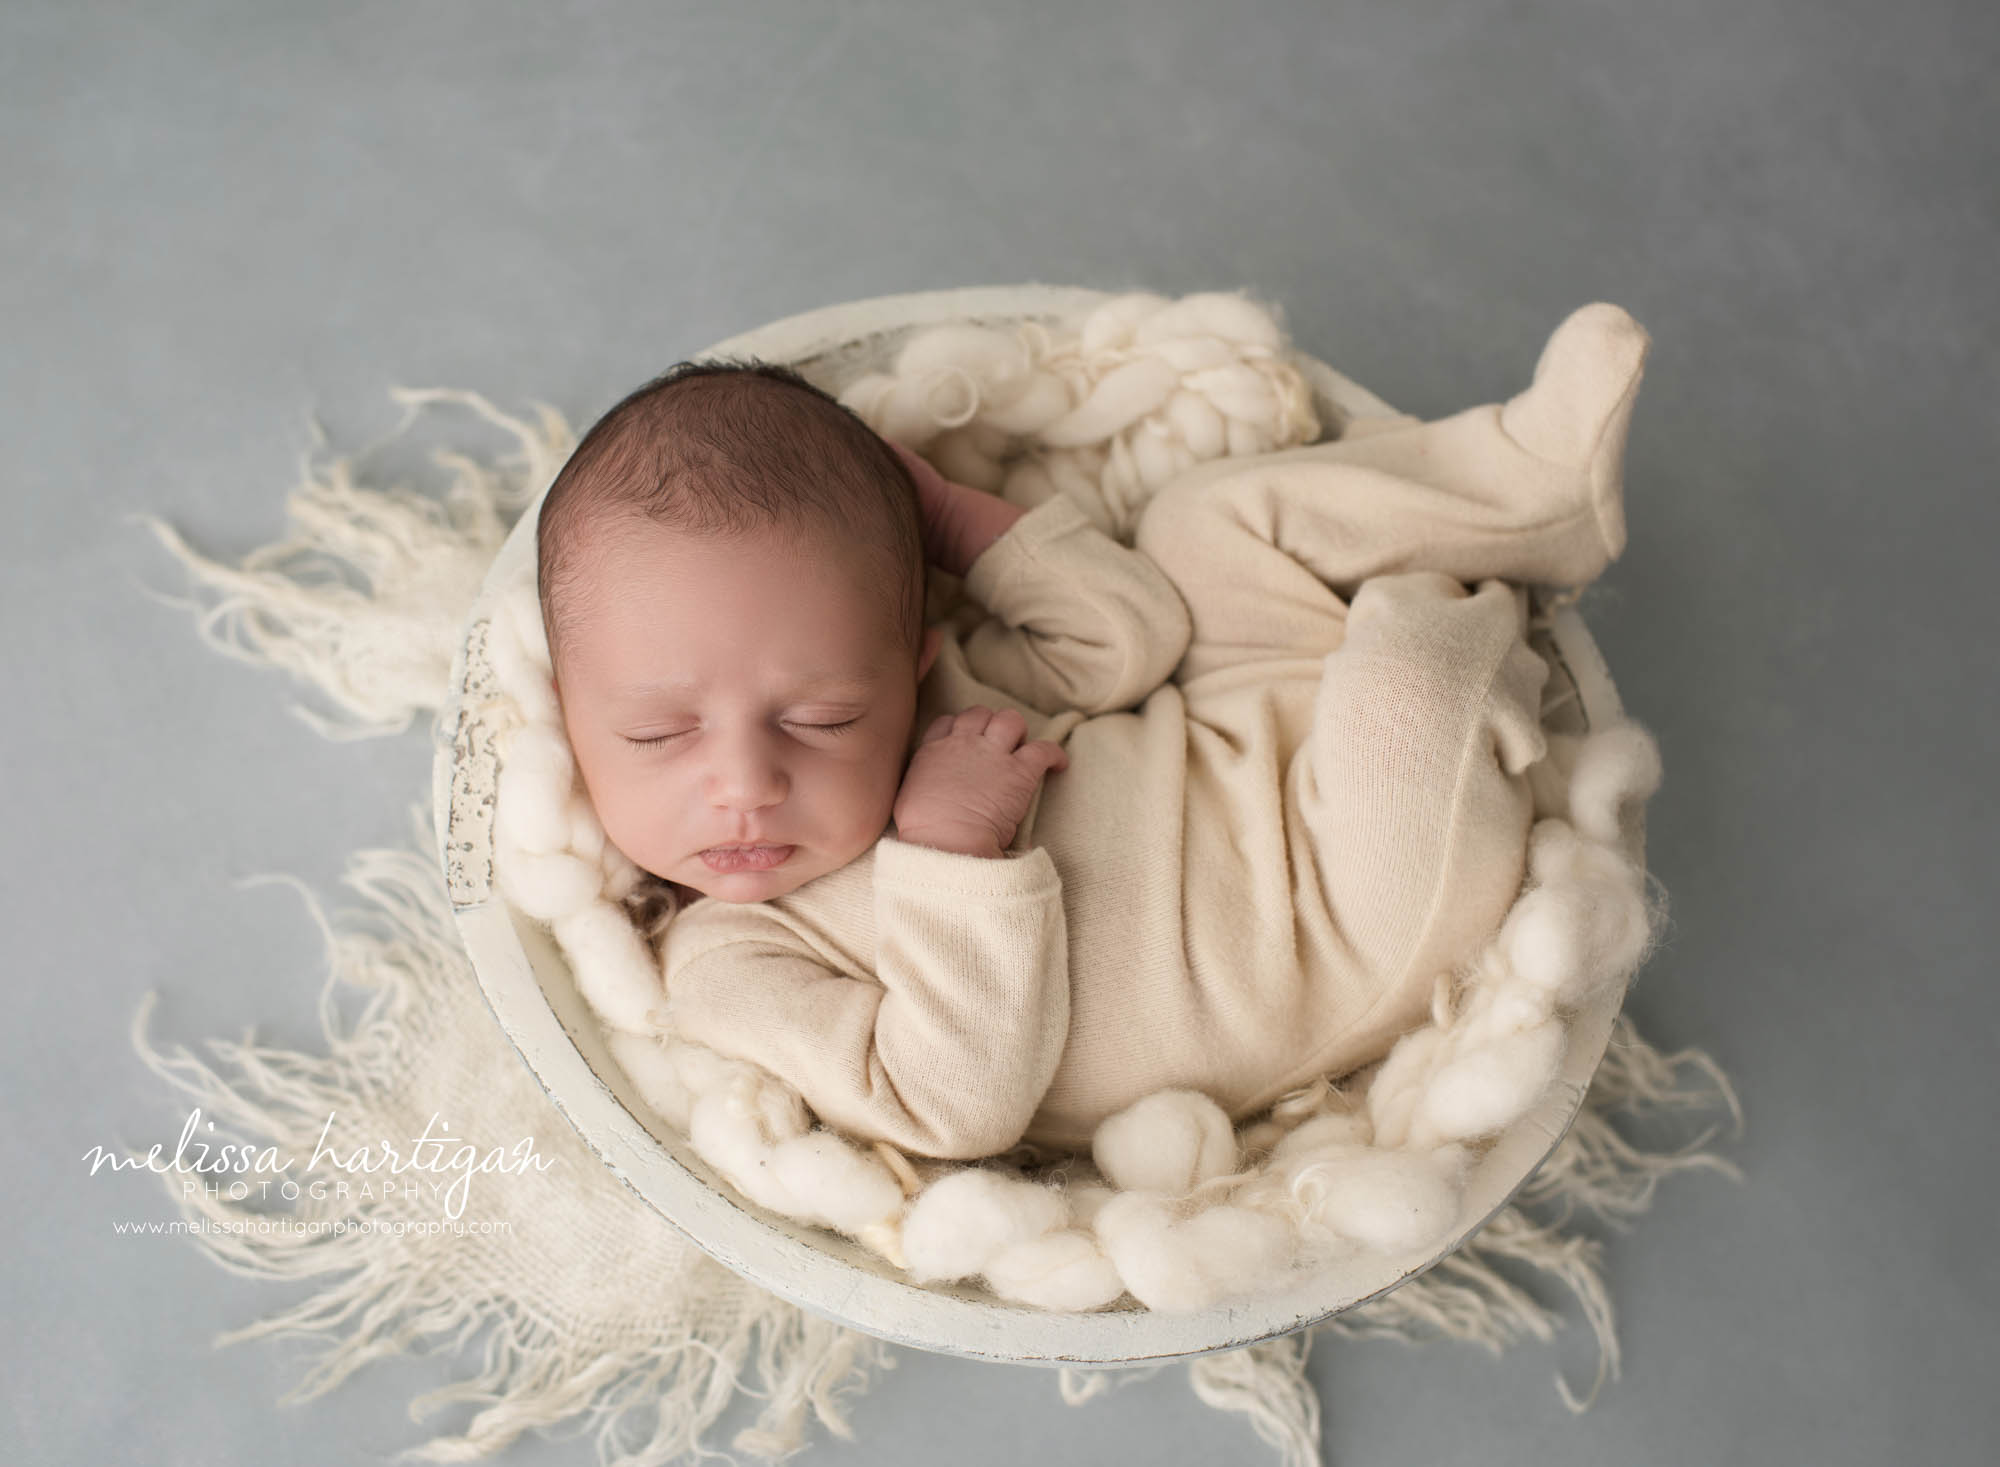 newborn baby boy posed in cream bowl wearing light tan colored footed sleeper